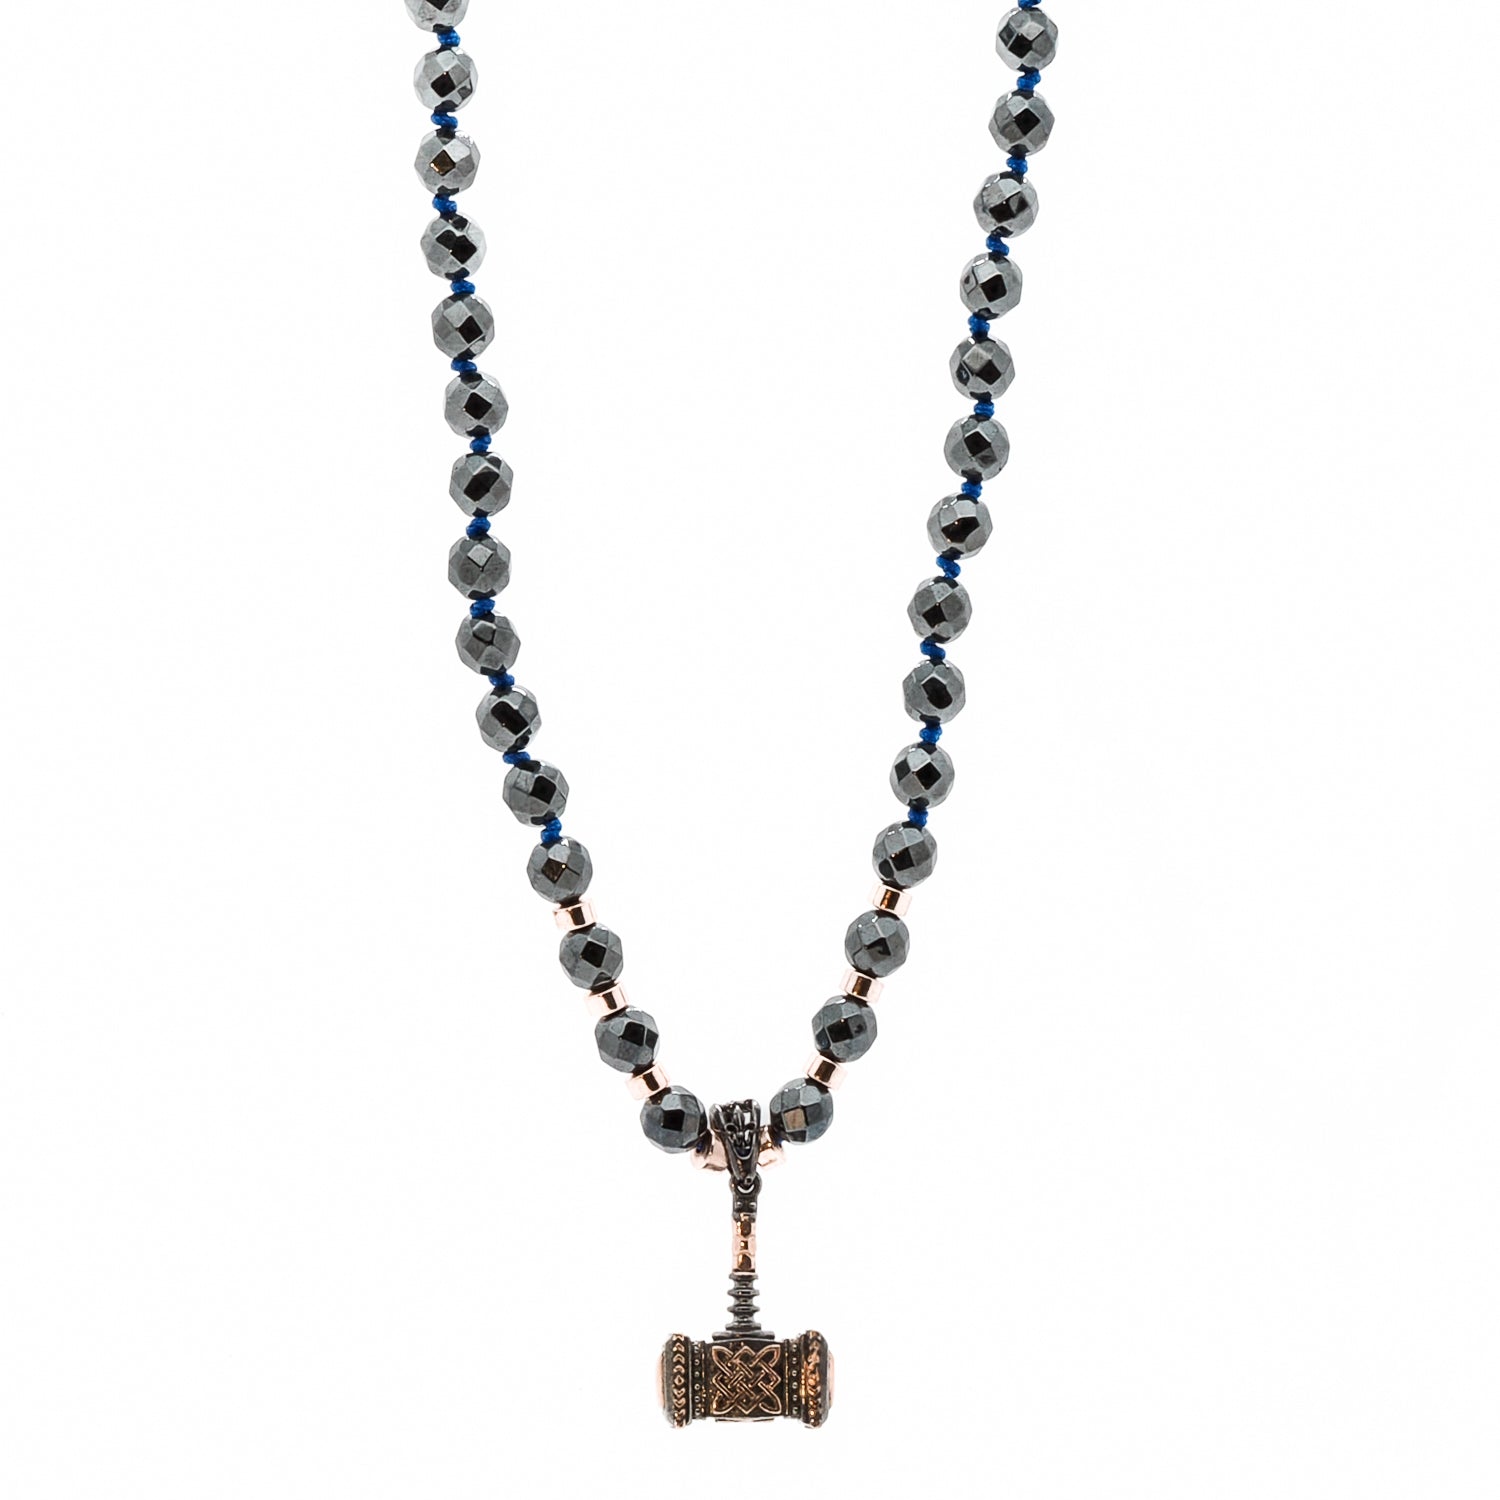 Hematite Stone Ax Men's Necklace with Handmade 925 Silver and 24K Gold Plated Pendant